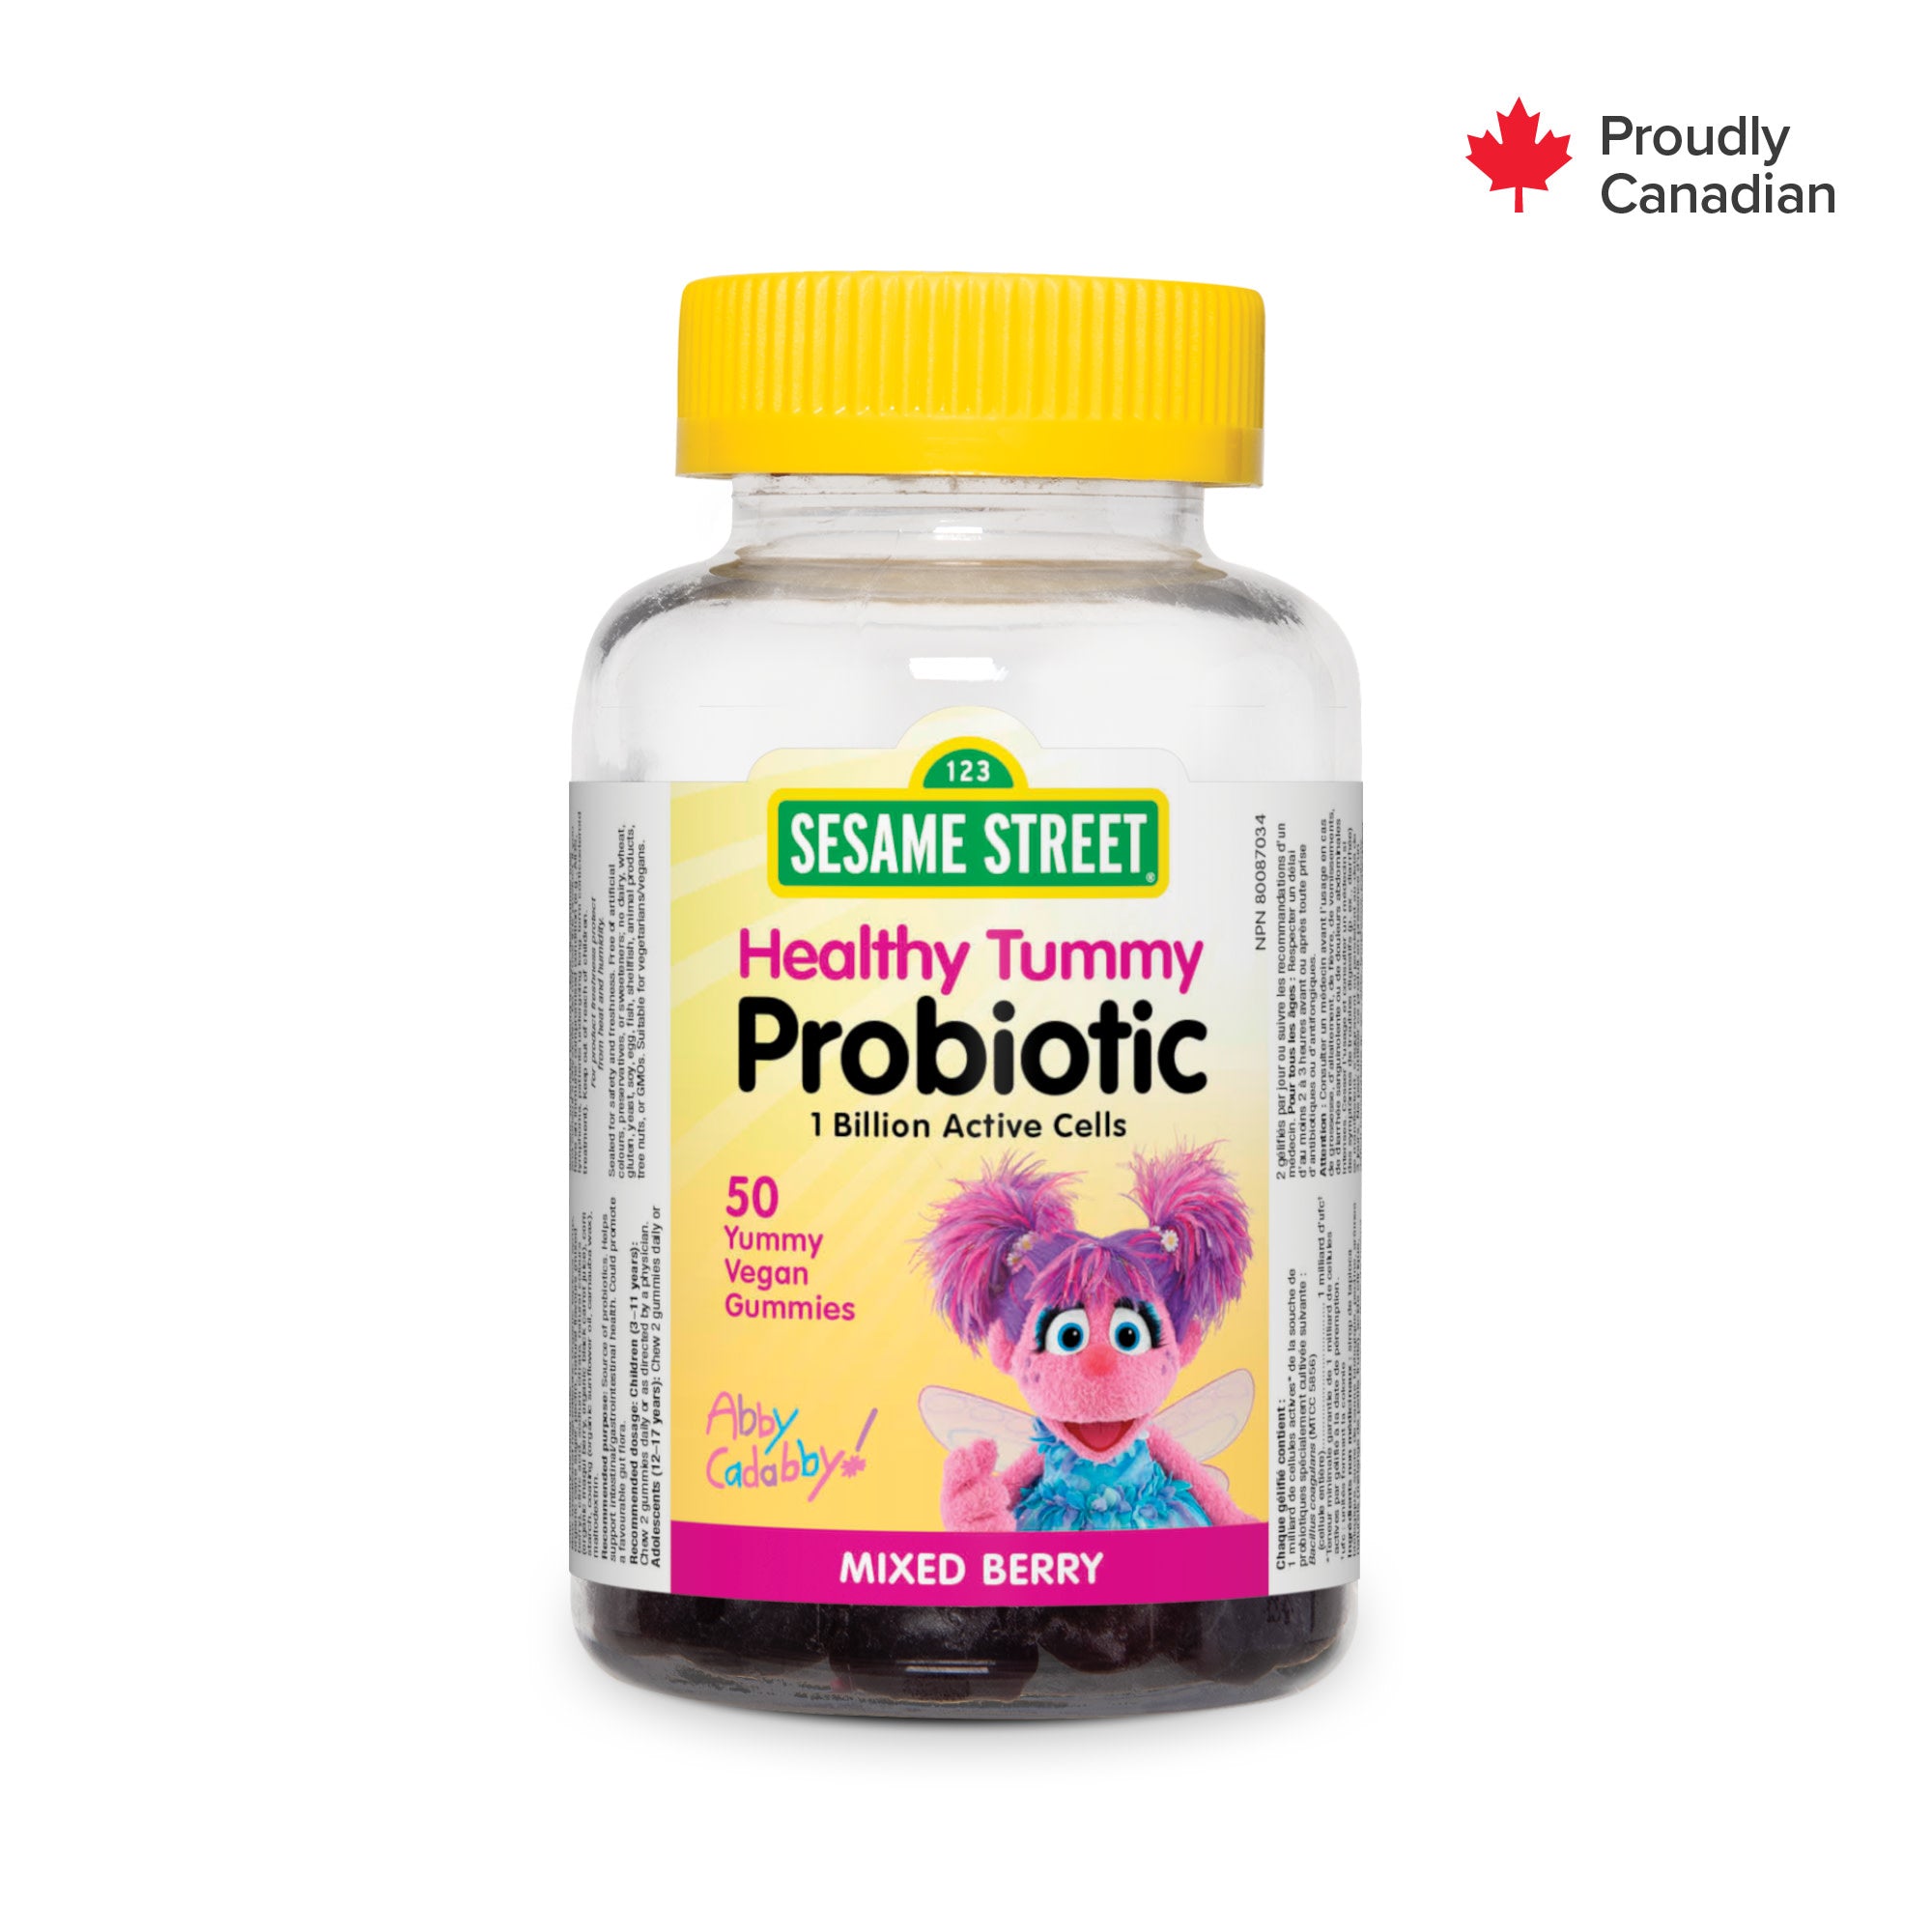 Healthy Tummy Probiotic 1 Billion Active Cells Mixed Berry for Sesame Street®|v|hi-res|WN3083